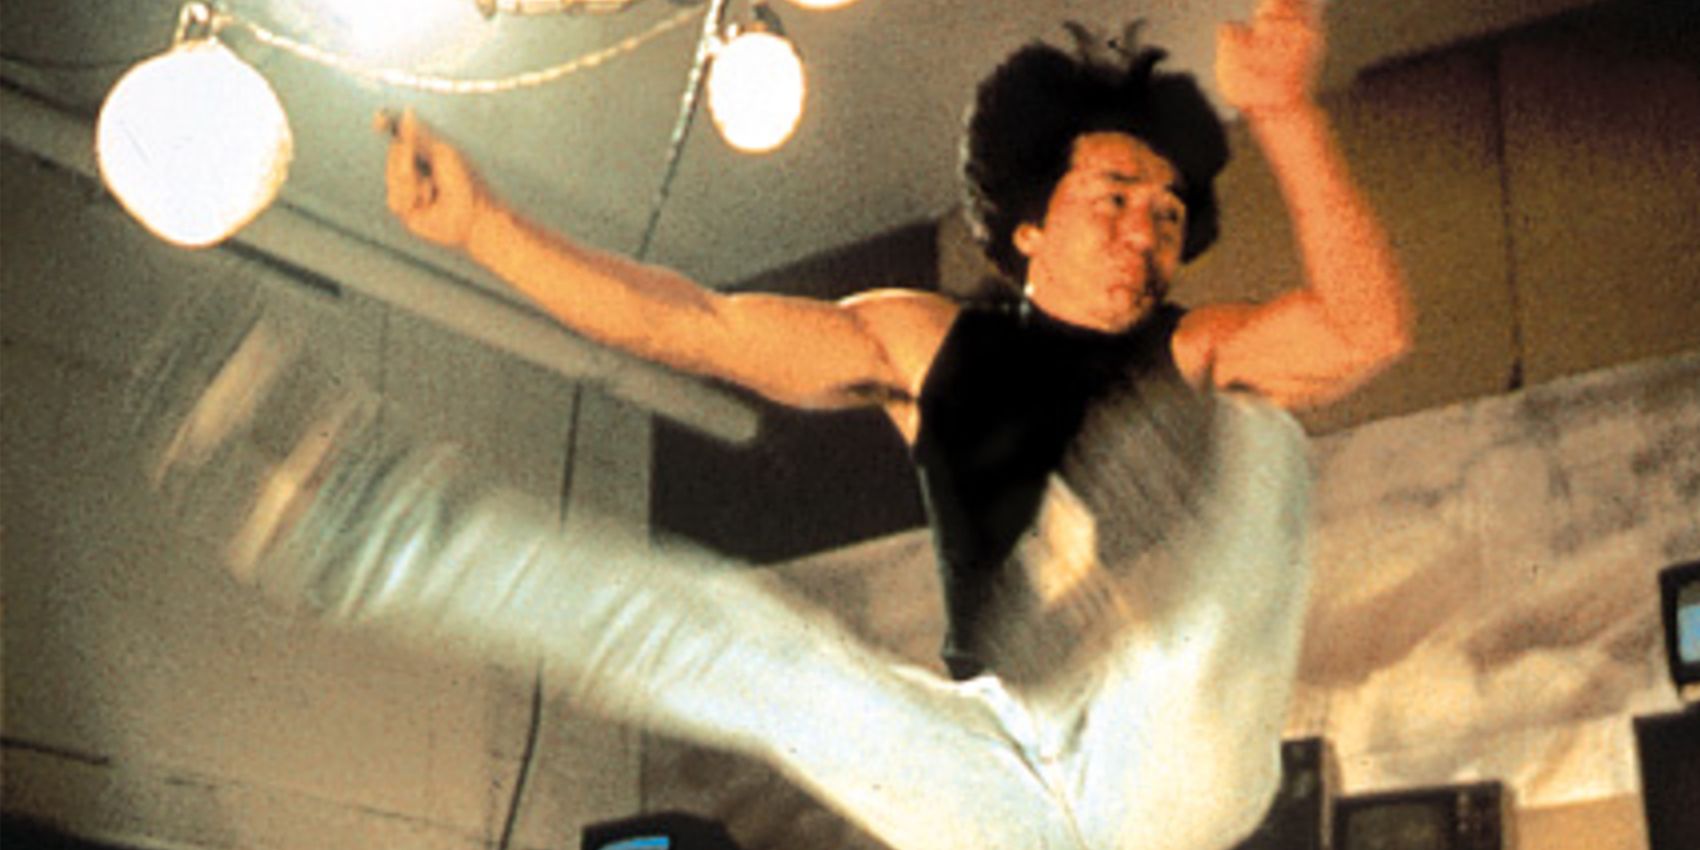 Jackie Chan in Rumble in the Bronx